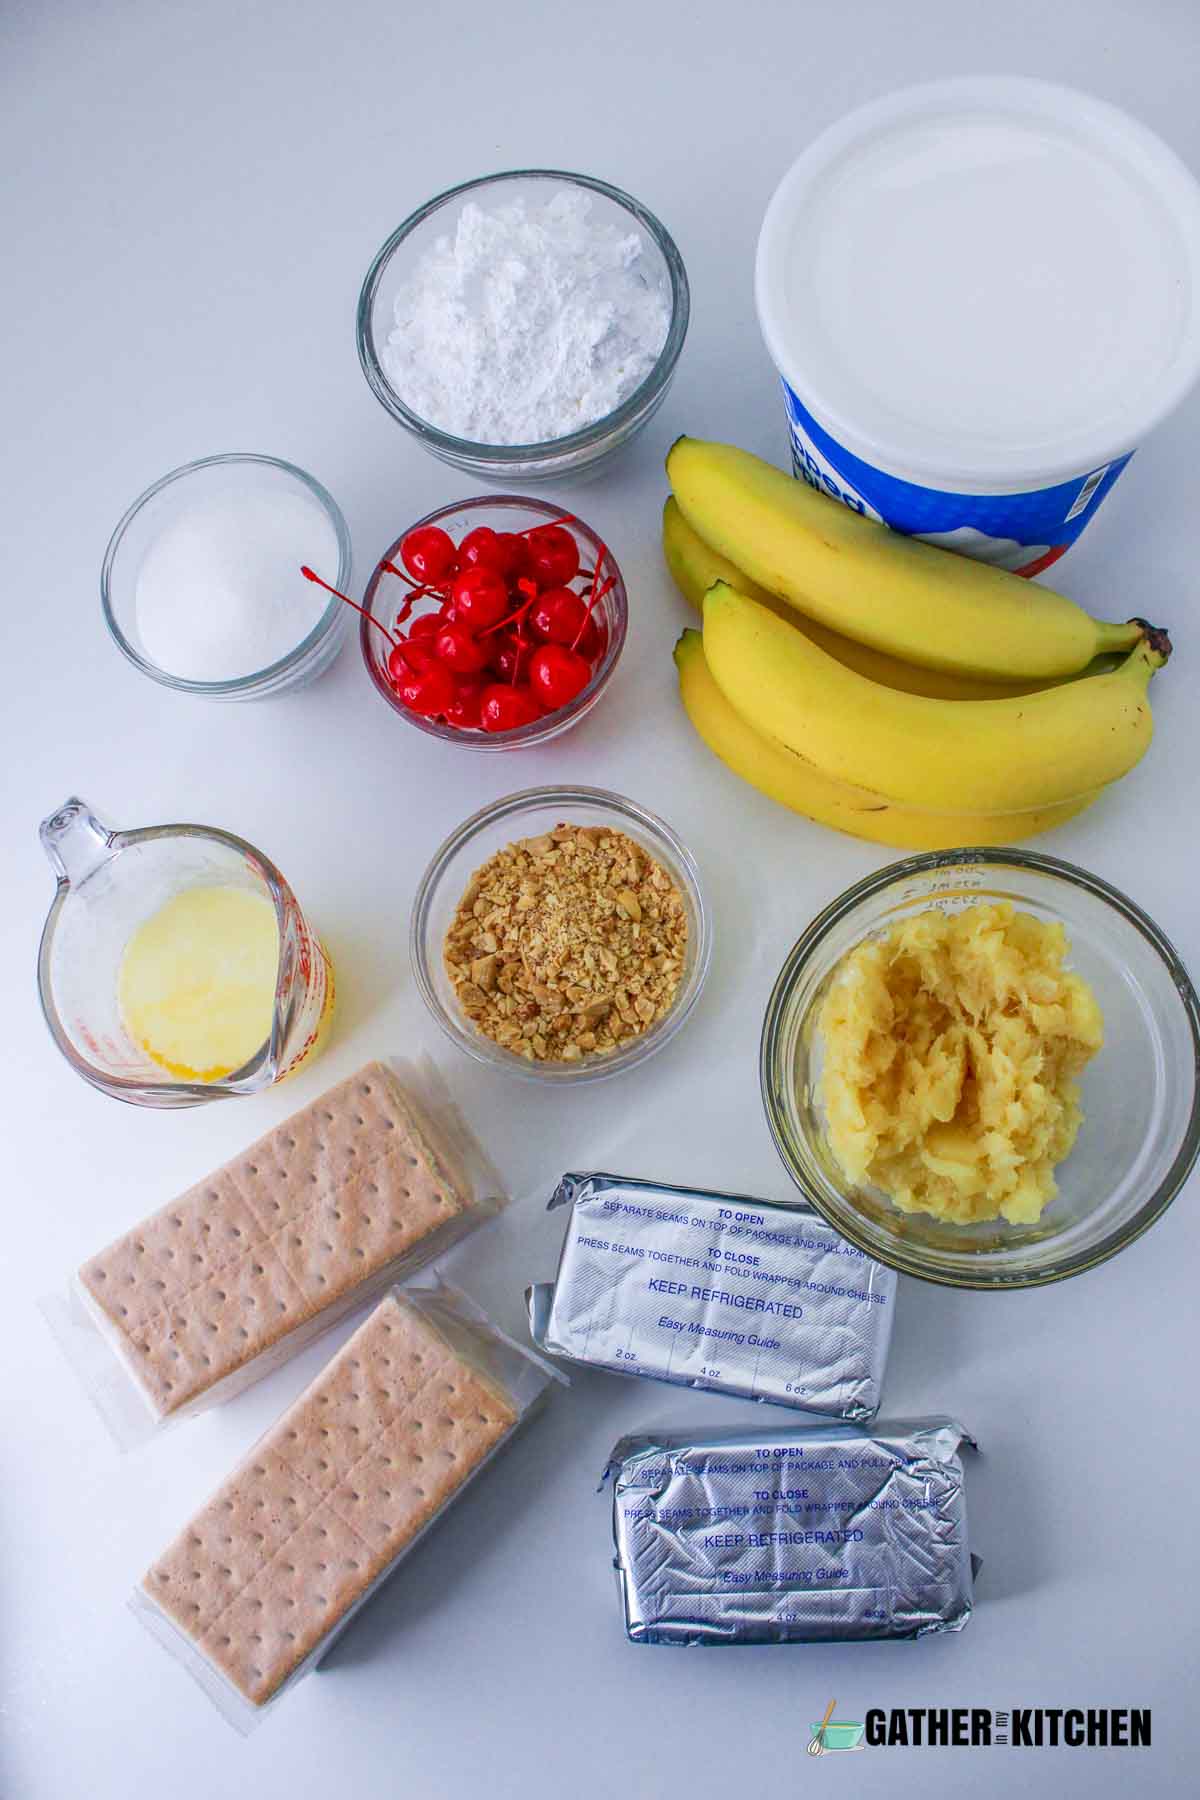 Ingredients for no bake banana split cake: powdered sugar, whipped topping, bananas, crushed pineapples, 2 cream cheese packages, 2 packages of graham crackers, melted butter, peanuts, marasschino cherries, sugar.